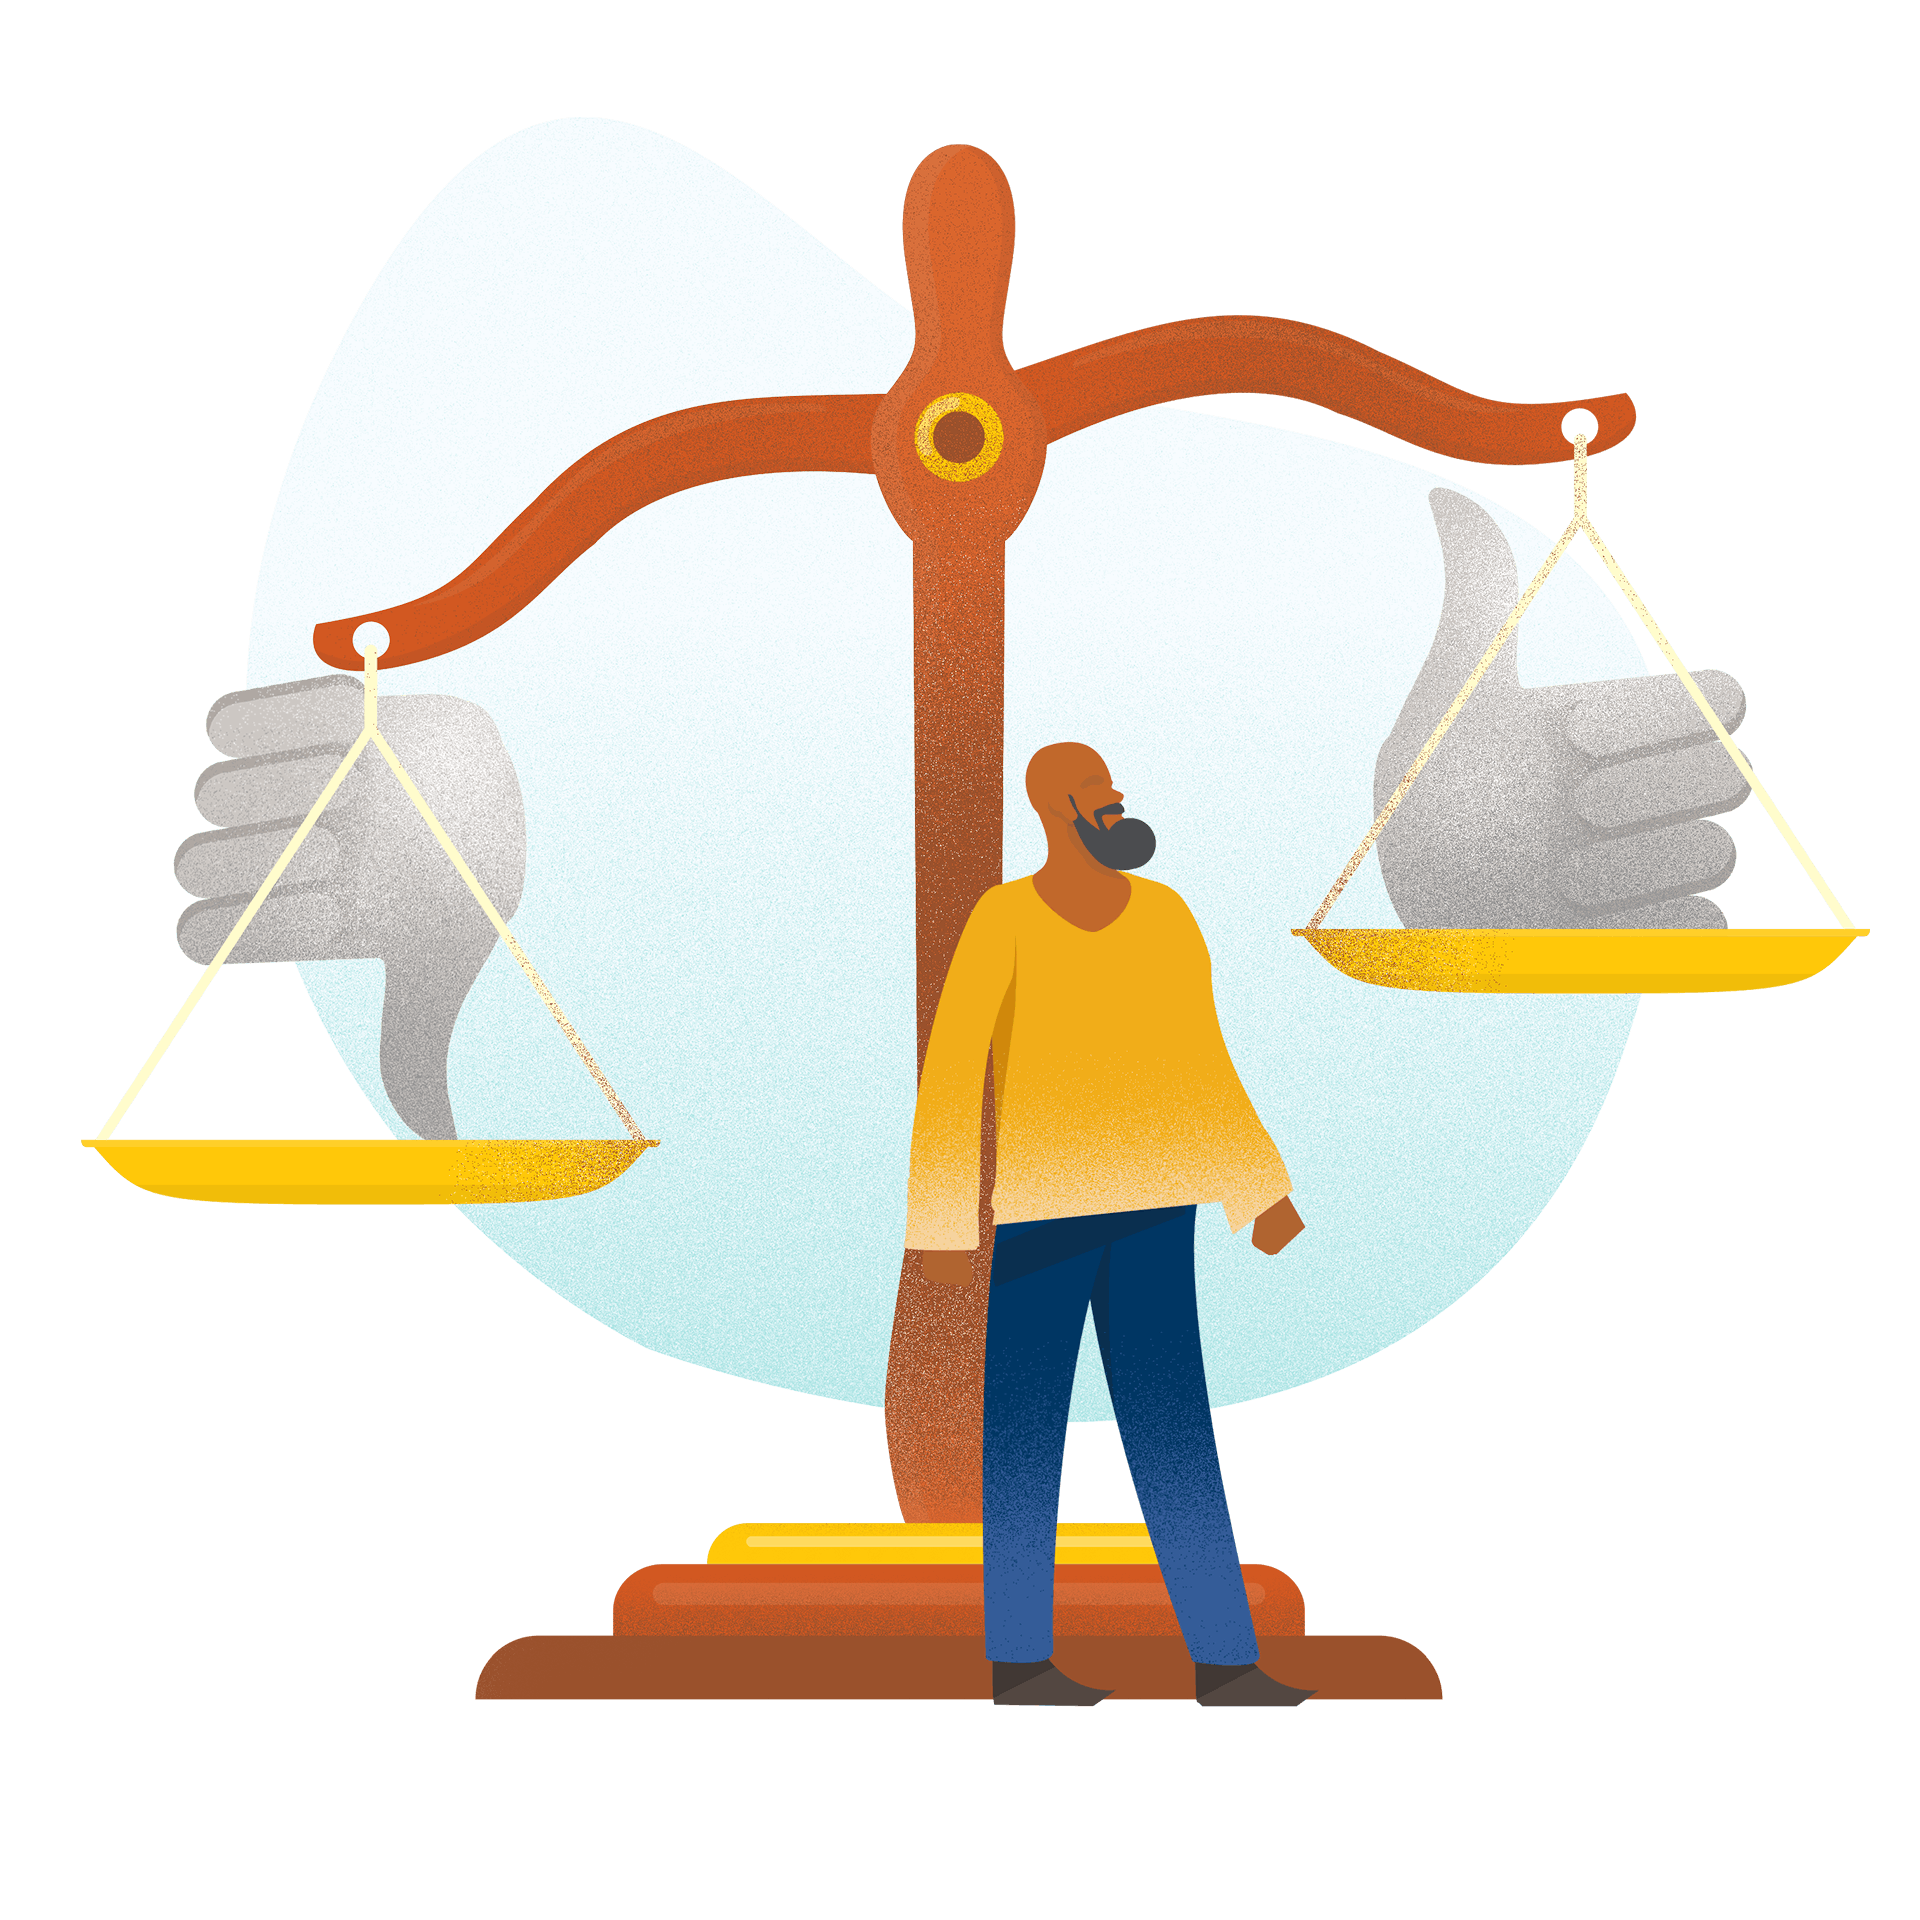 An illustration of a man standing in front of libra scale